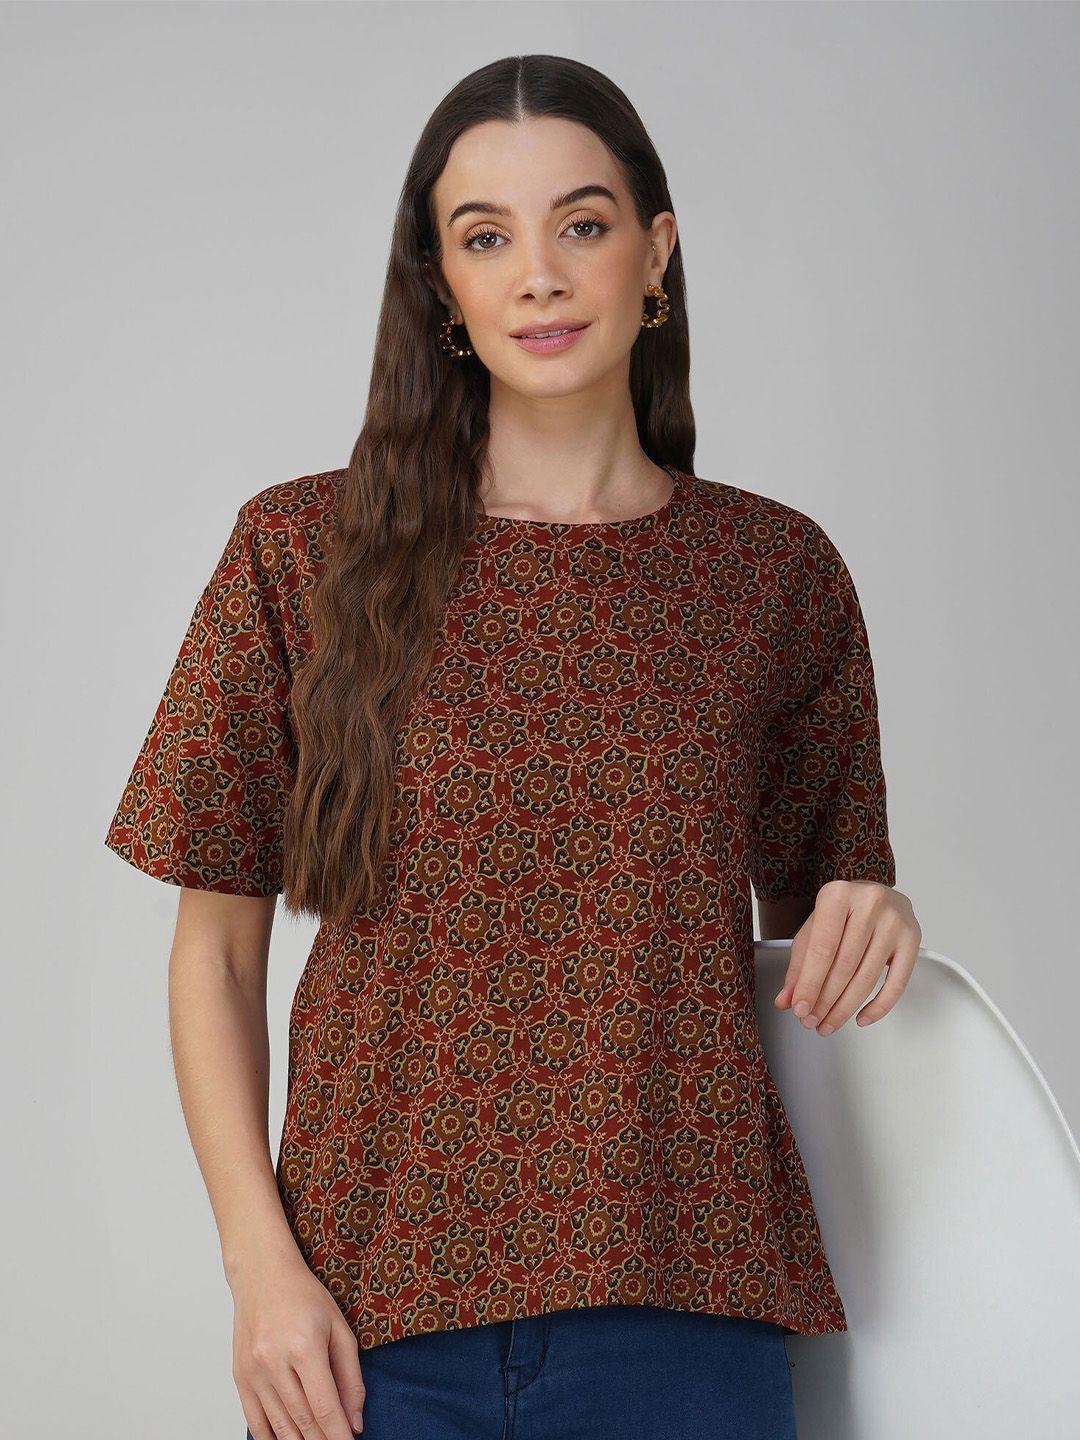 sparsa ethnic motifs printed pure cotton boxy top